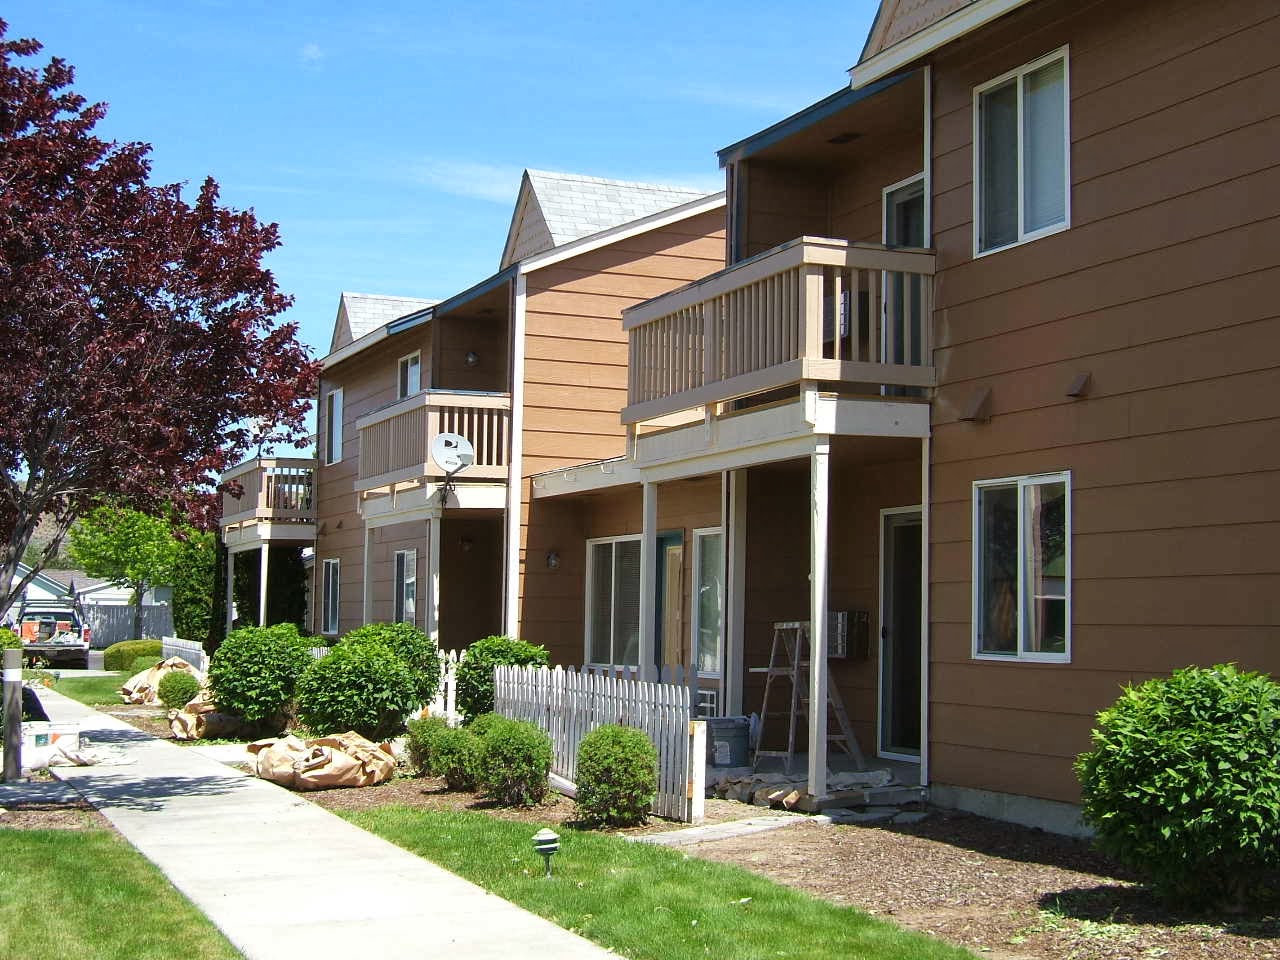 Photo of MORNINGSIDE SENIOR APARTMENTS. Affordable housing located at 703 QUINCE STREET OMAK, WA 98841